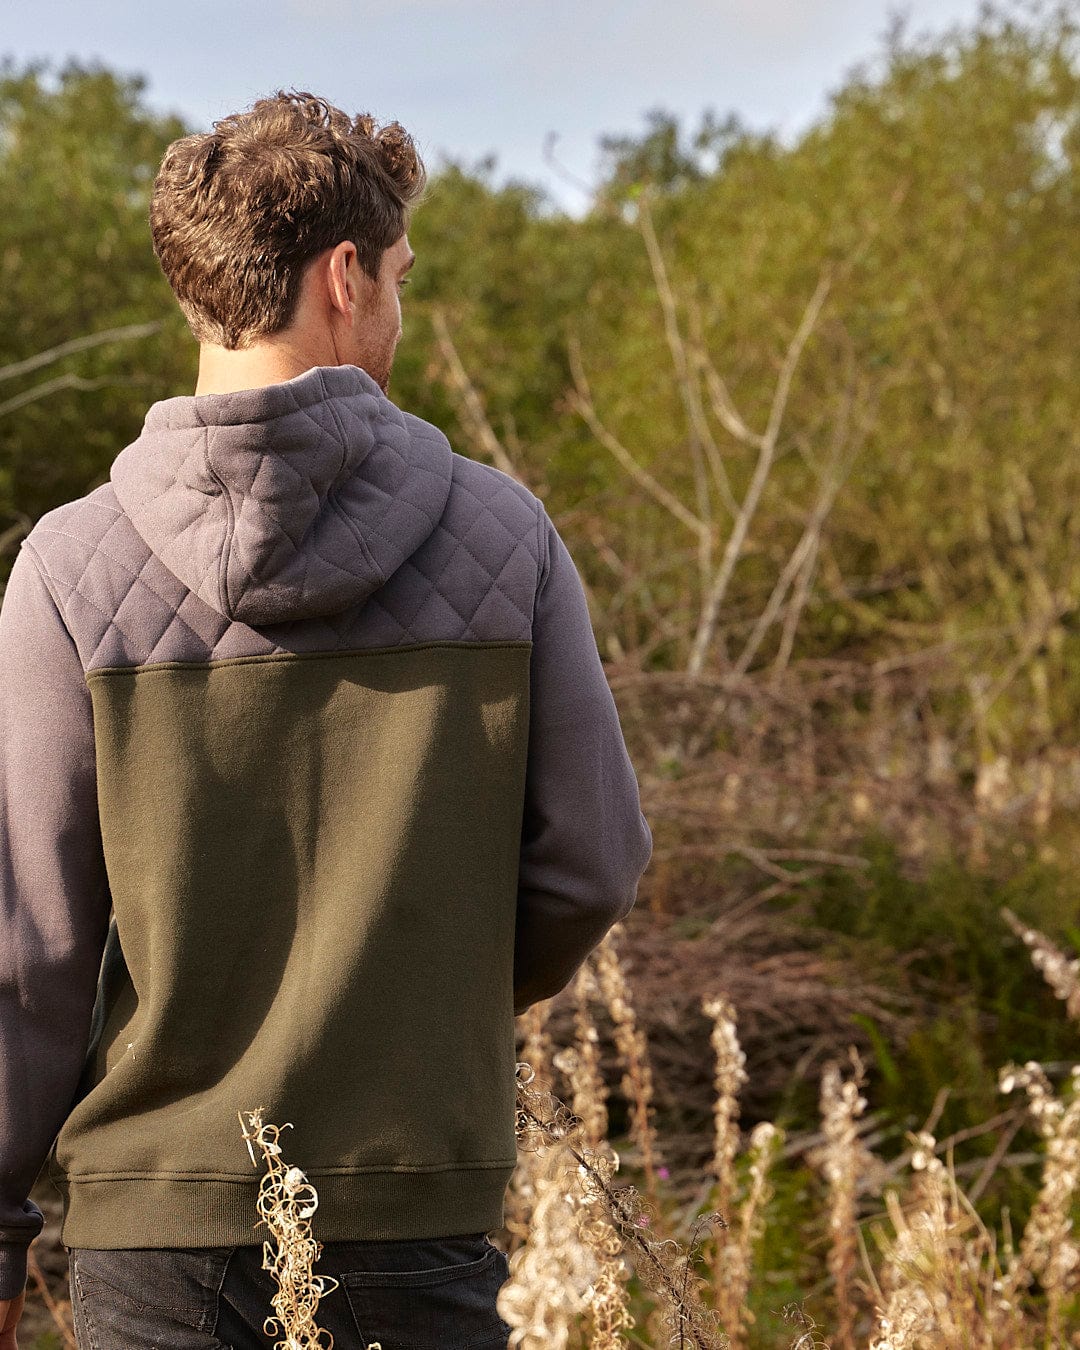 A Saltrock Aiken Mens 1/4 Neck Hoodie - Green provides warmth and comfort for a man standing in the outdoors field.